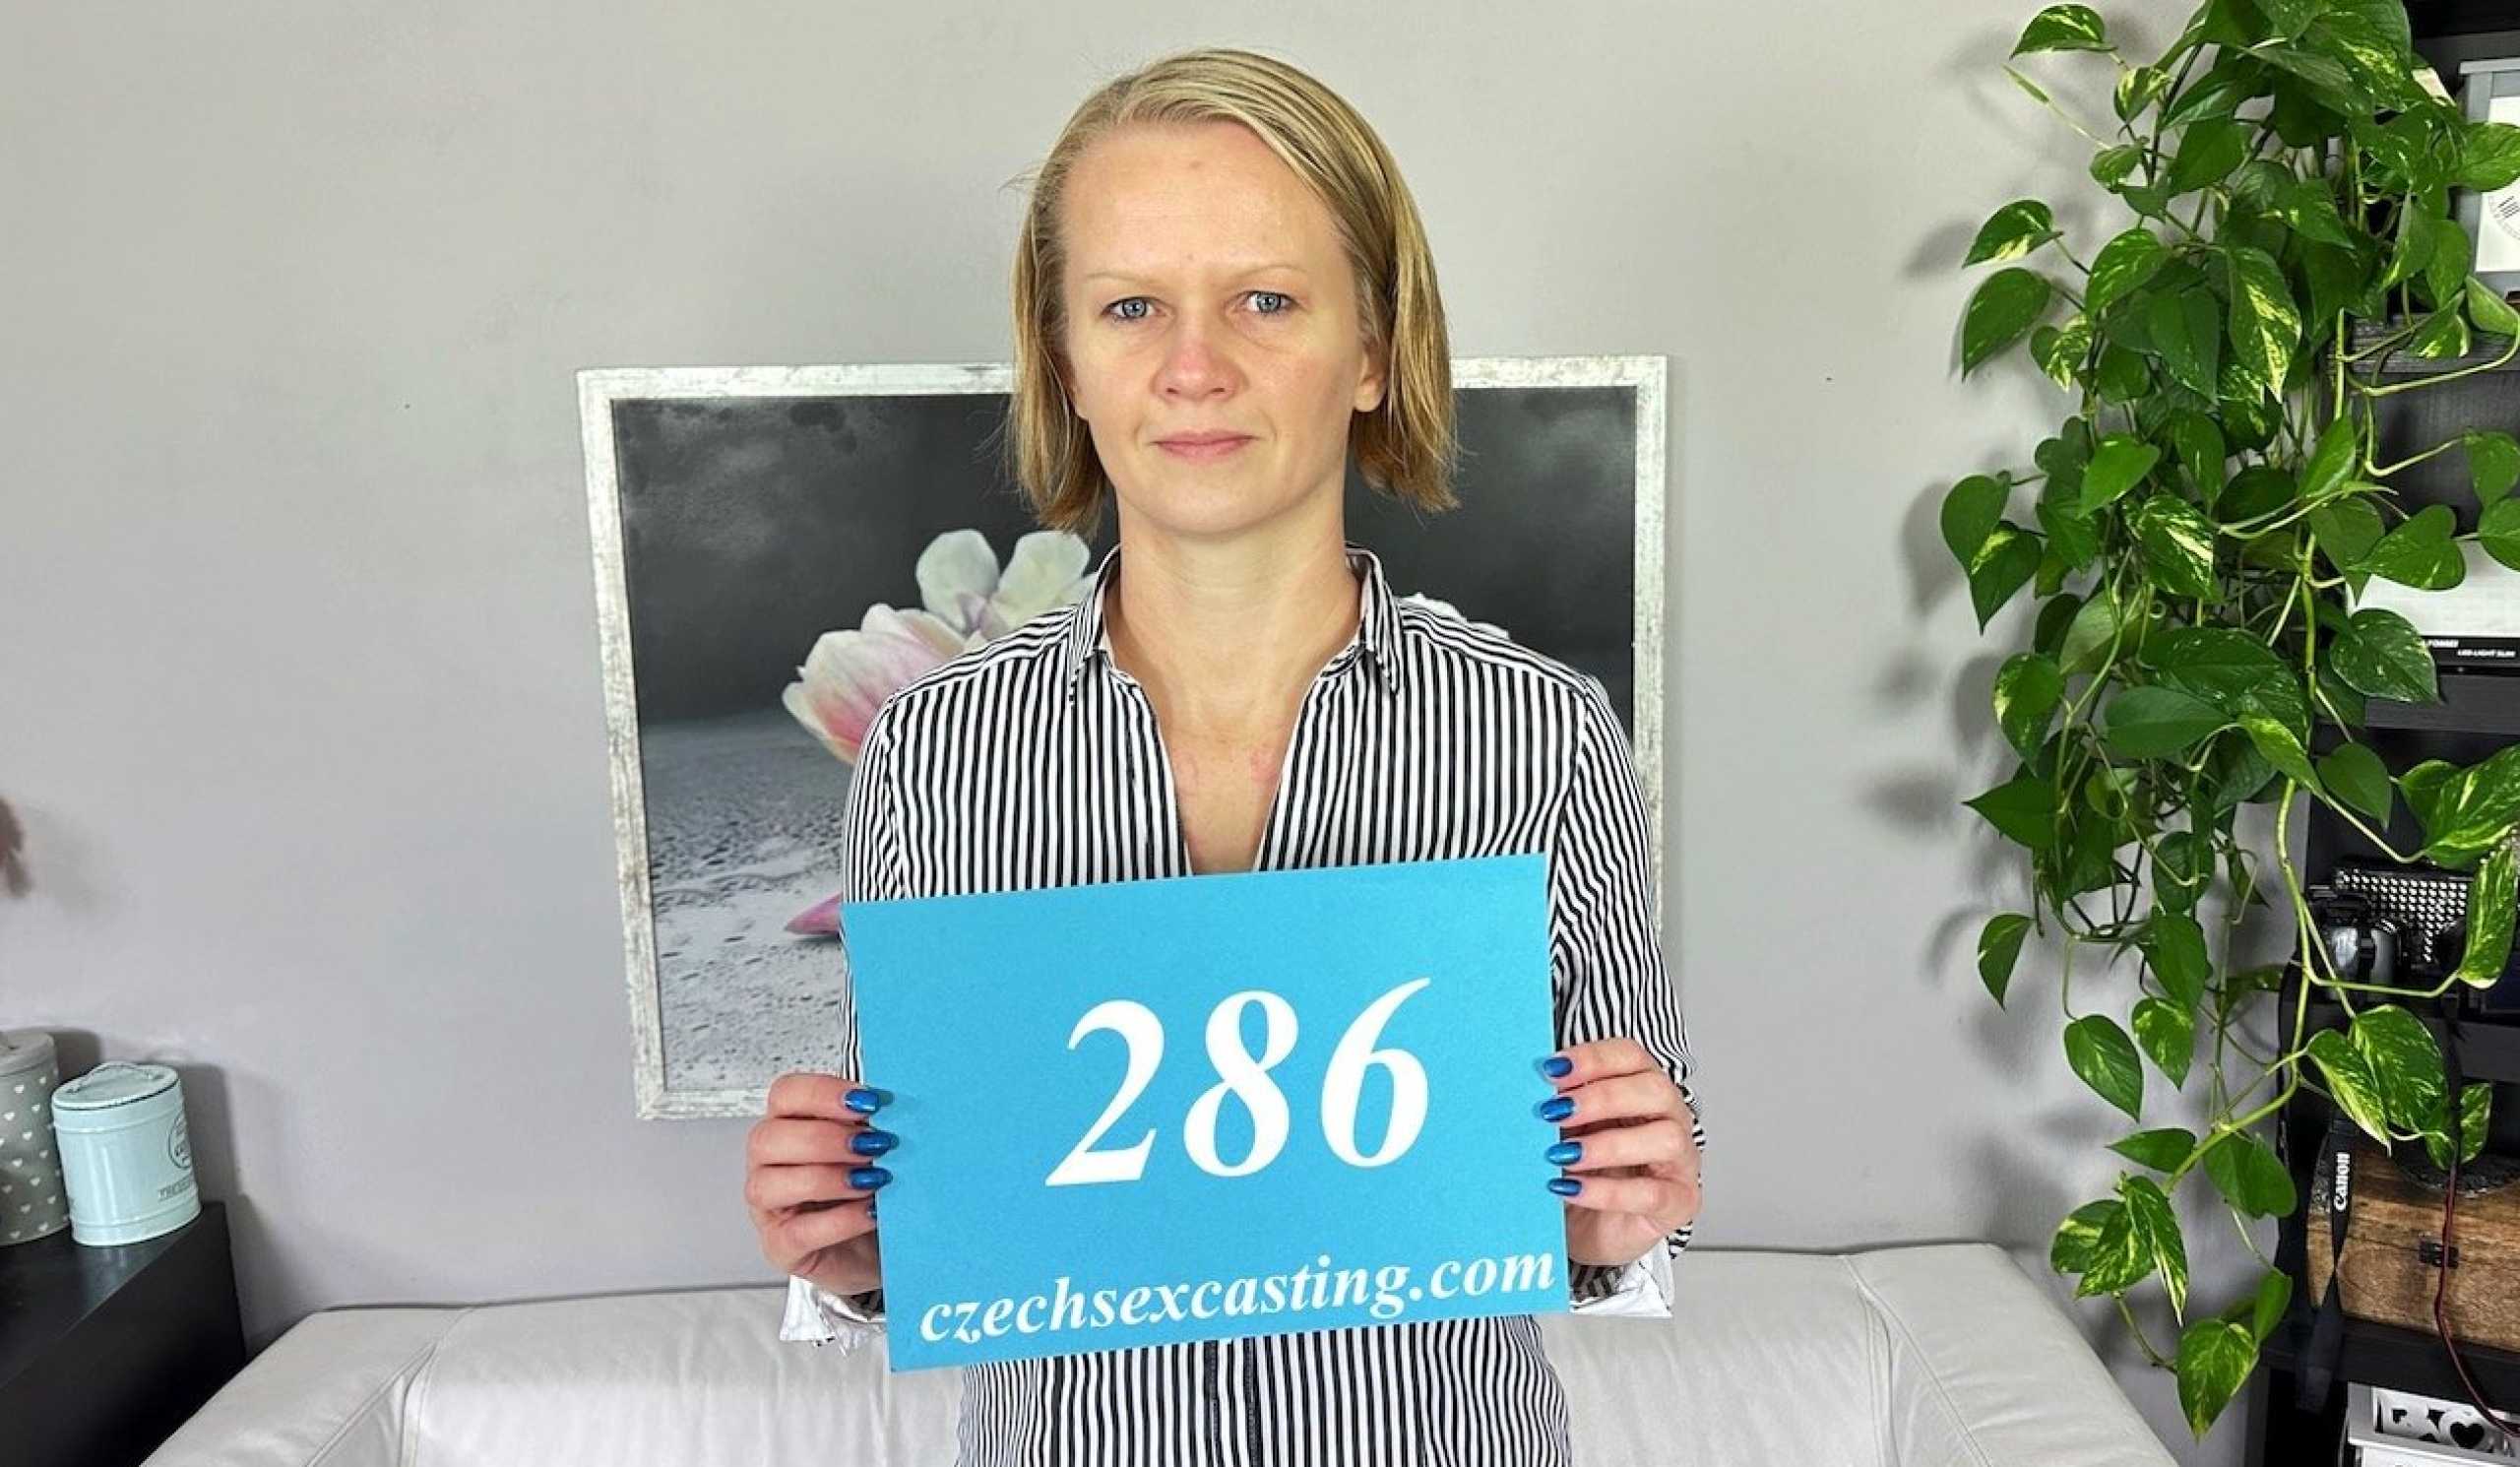 Czech Sex Casting 286 She Likes To Show Off Amateur Porn Casting Videos